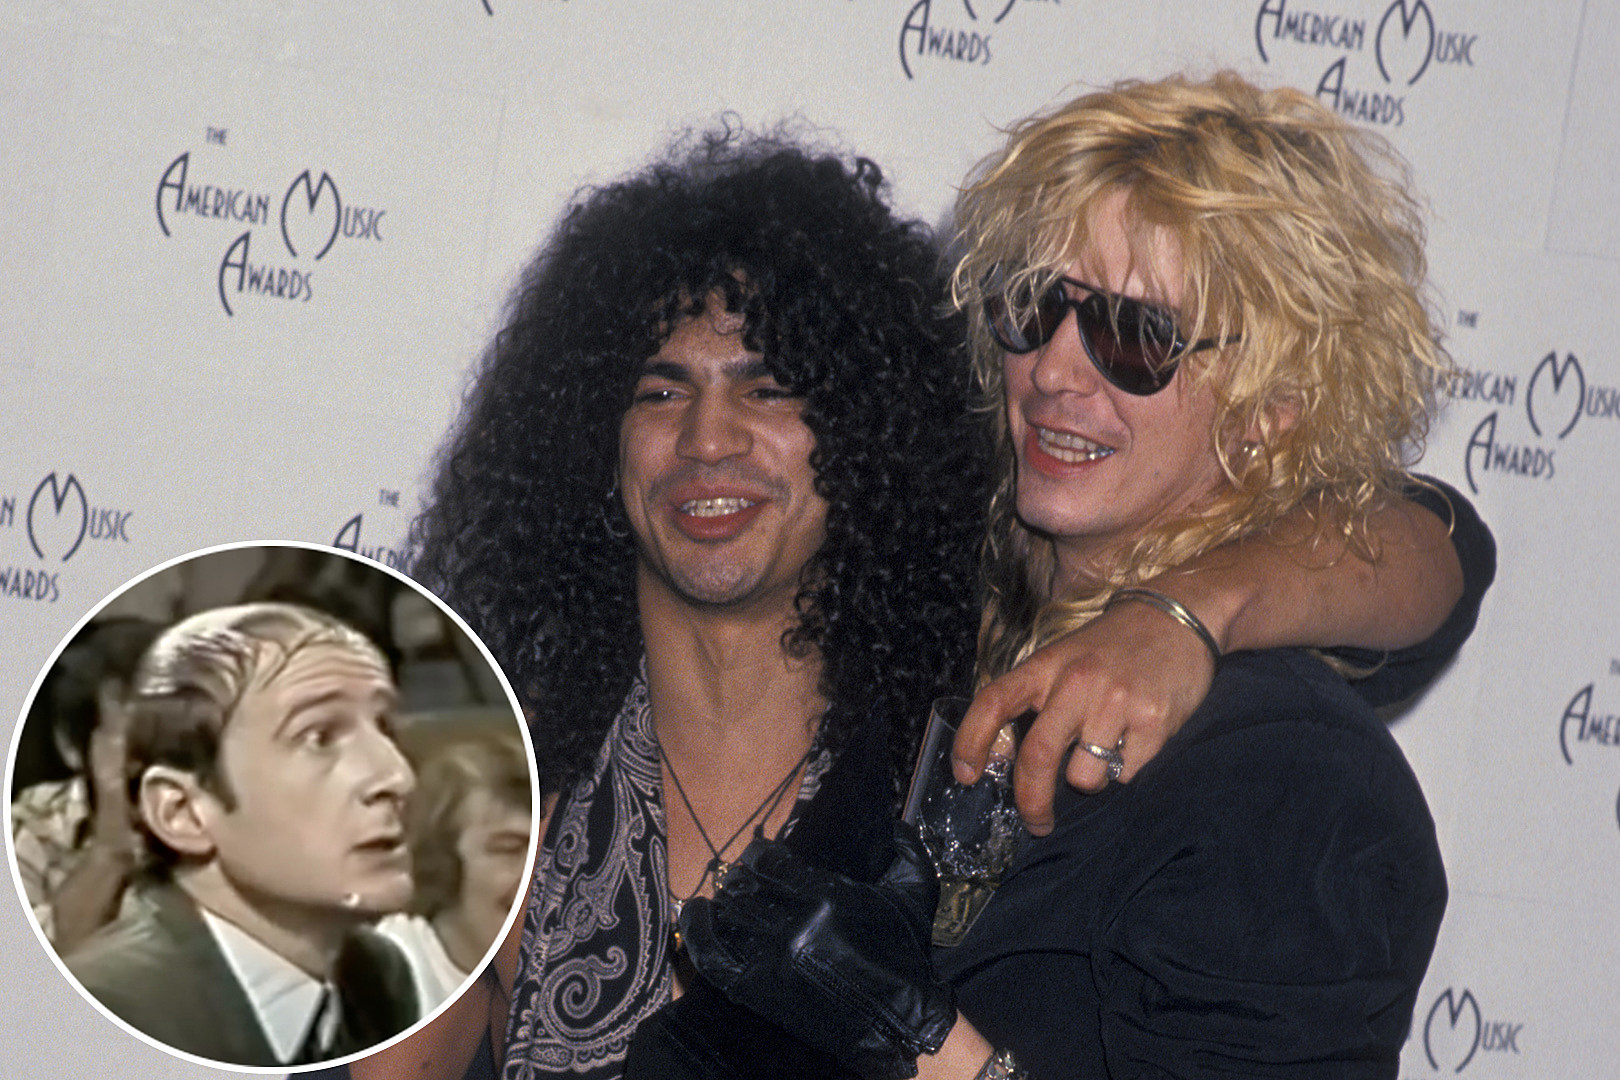 Hilarious Guns N' Roses Interview From 1990s Resurfaces Online